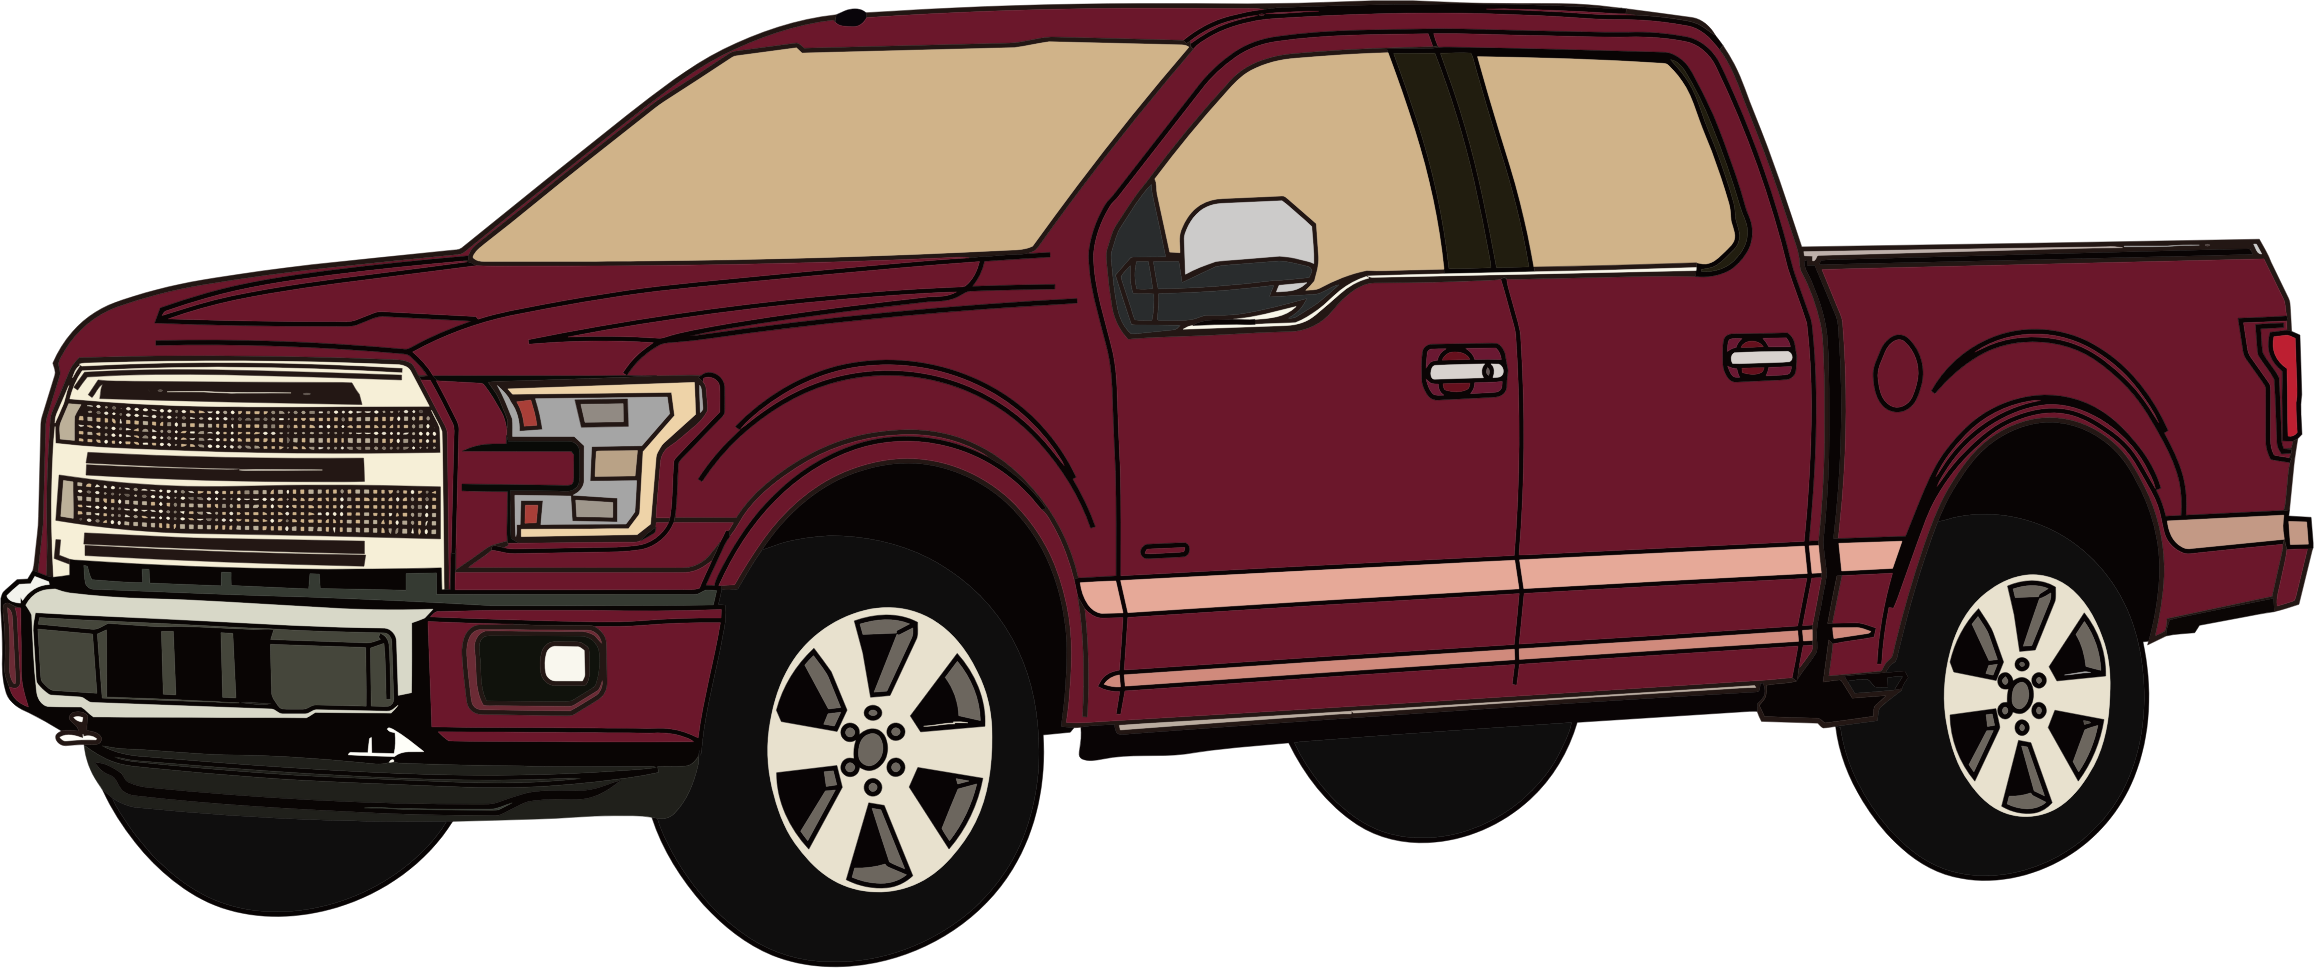 Pickup truck clipart free images clipartix image